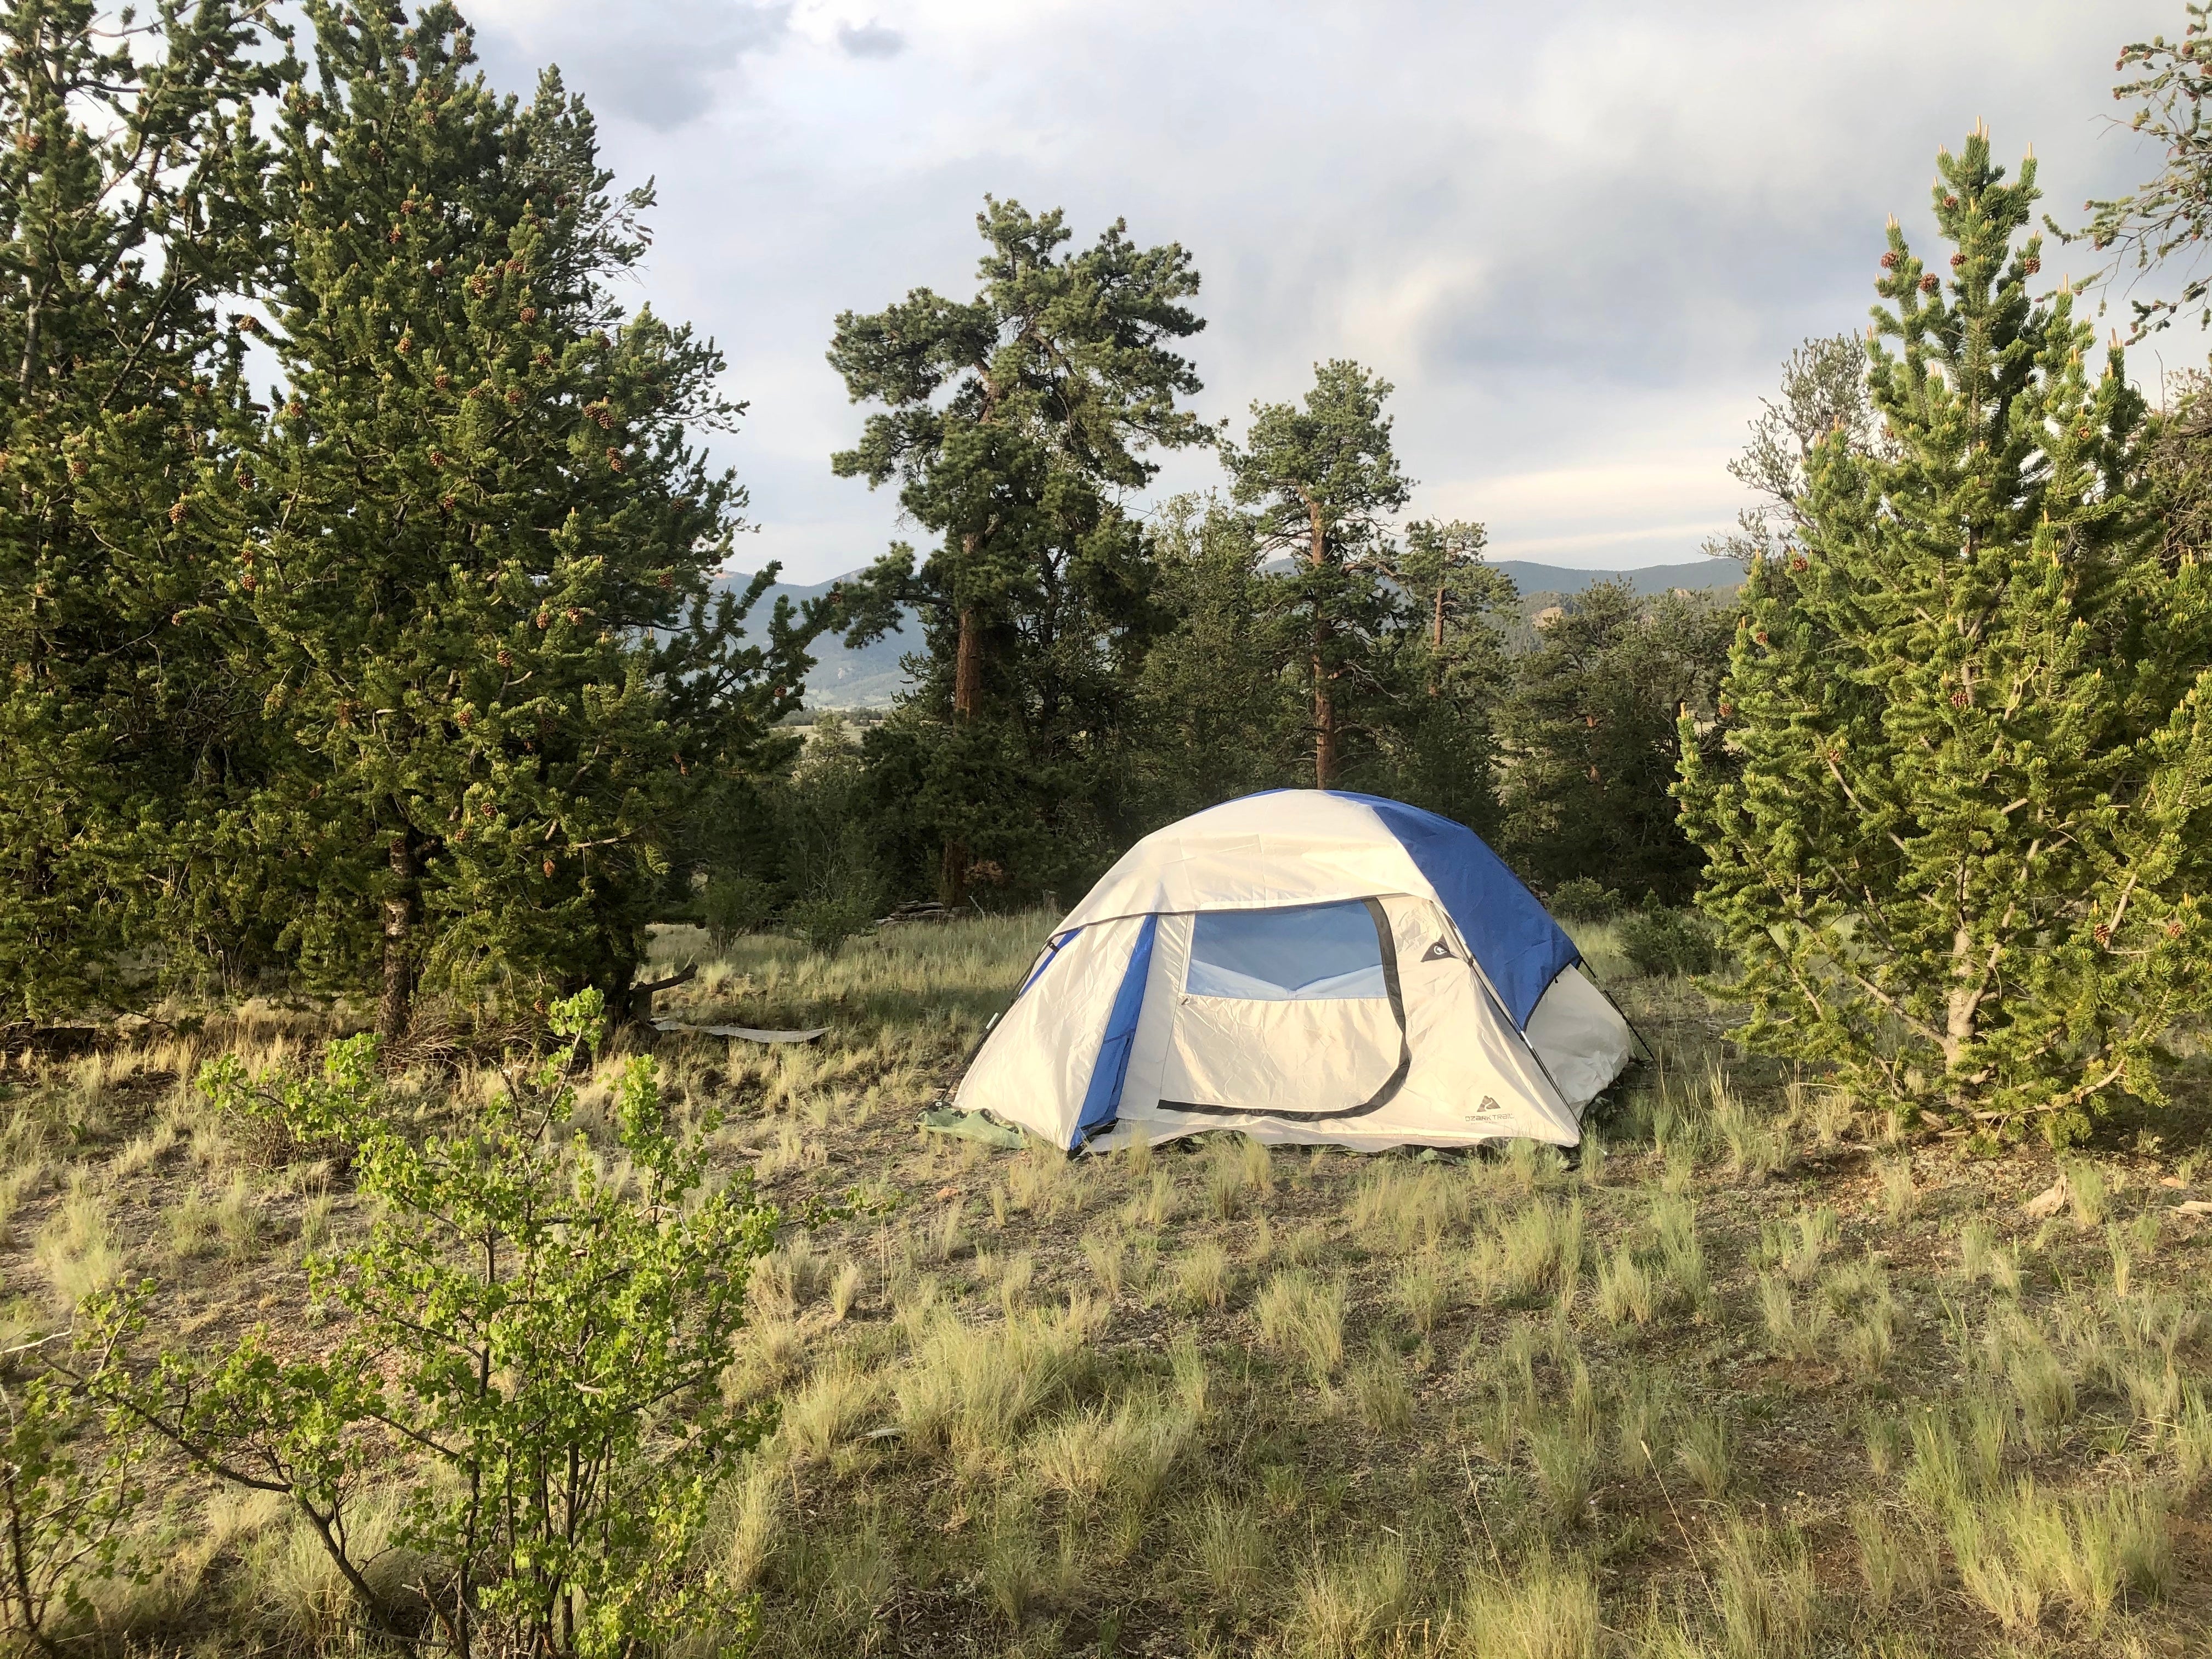 Camper submitted image from Dispersed camping FSR 239 - 5